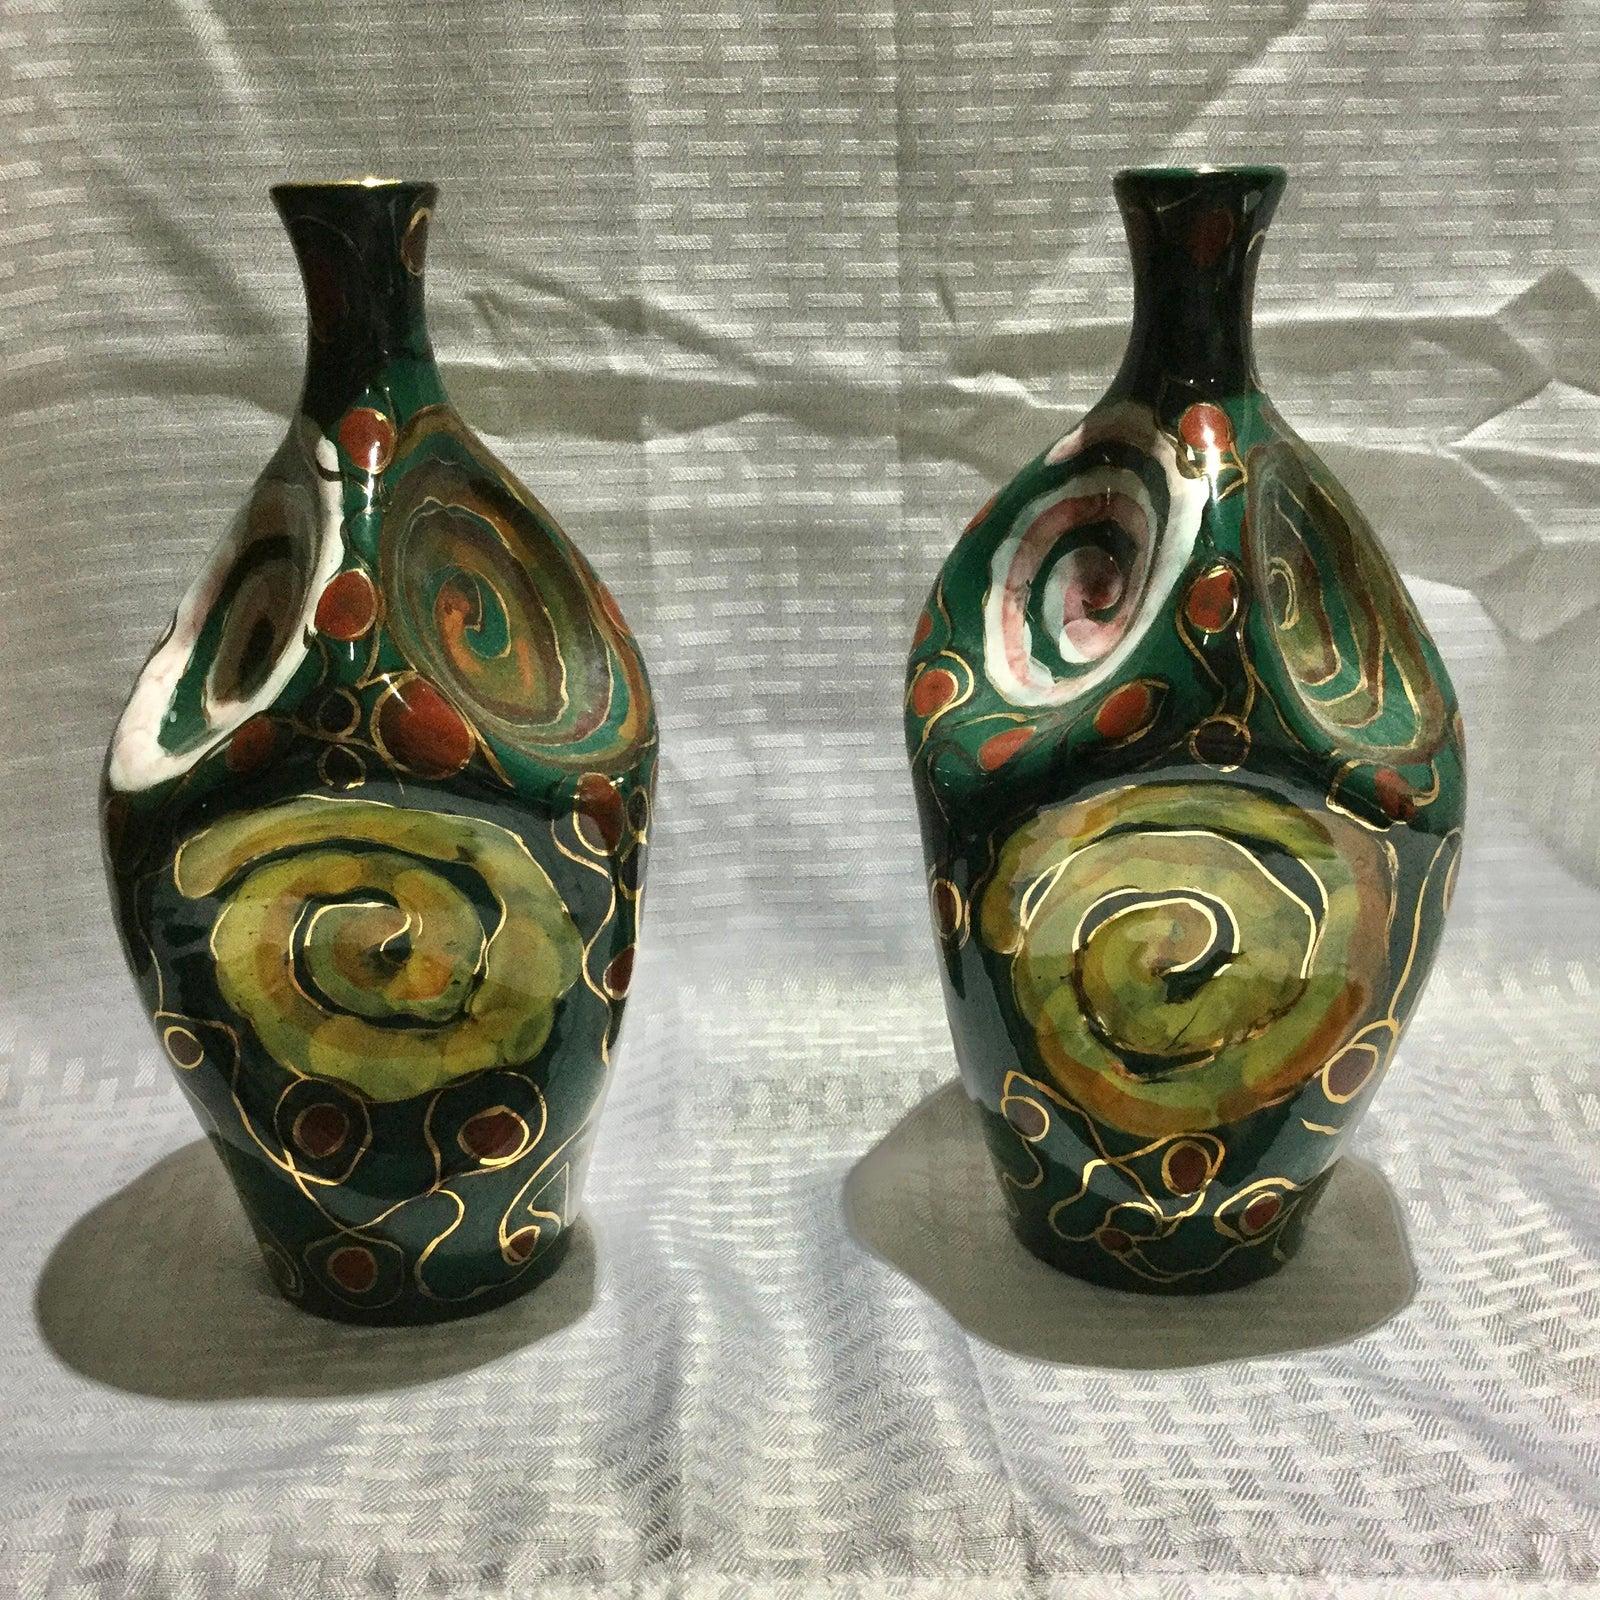 Pair of Italian midcentury glazed terracotta vases. Six indented circles which makes them extremely interesting and each with a different color palette including dark green, rust, light green, light rose, gilt and black. They have good weight to